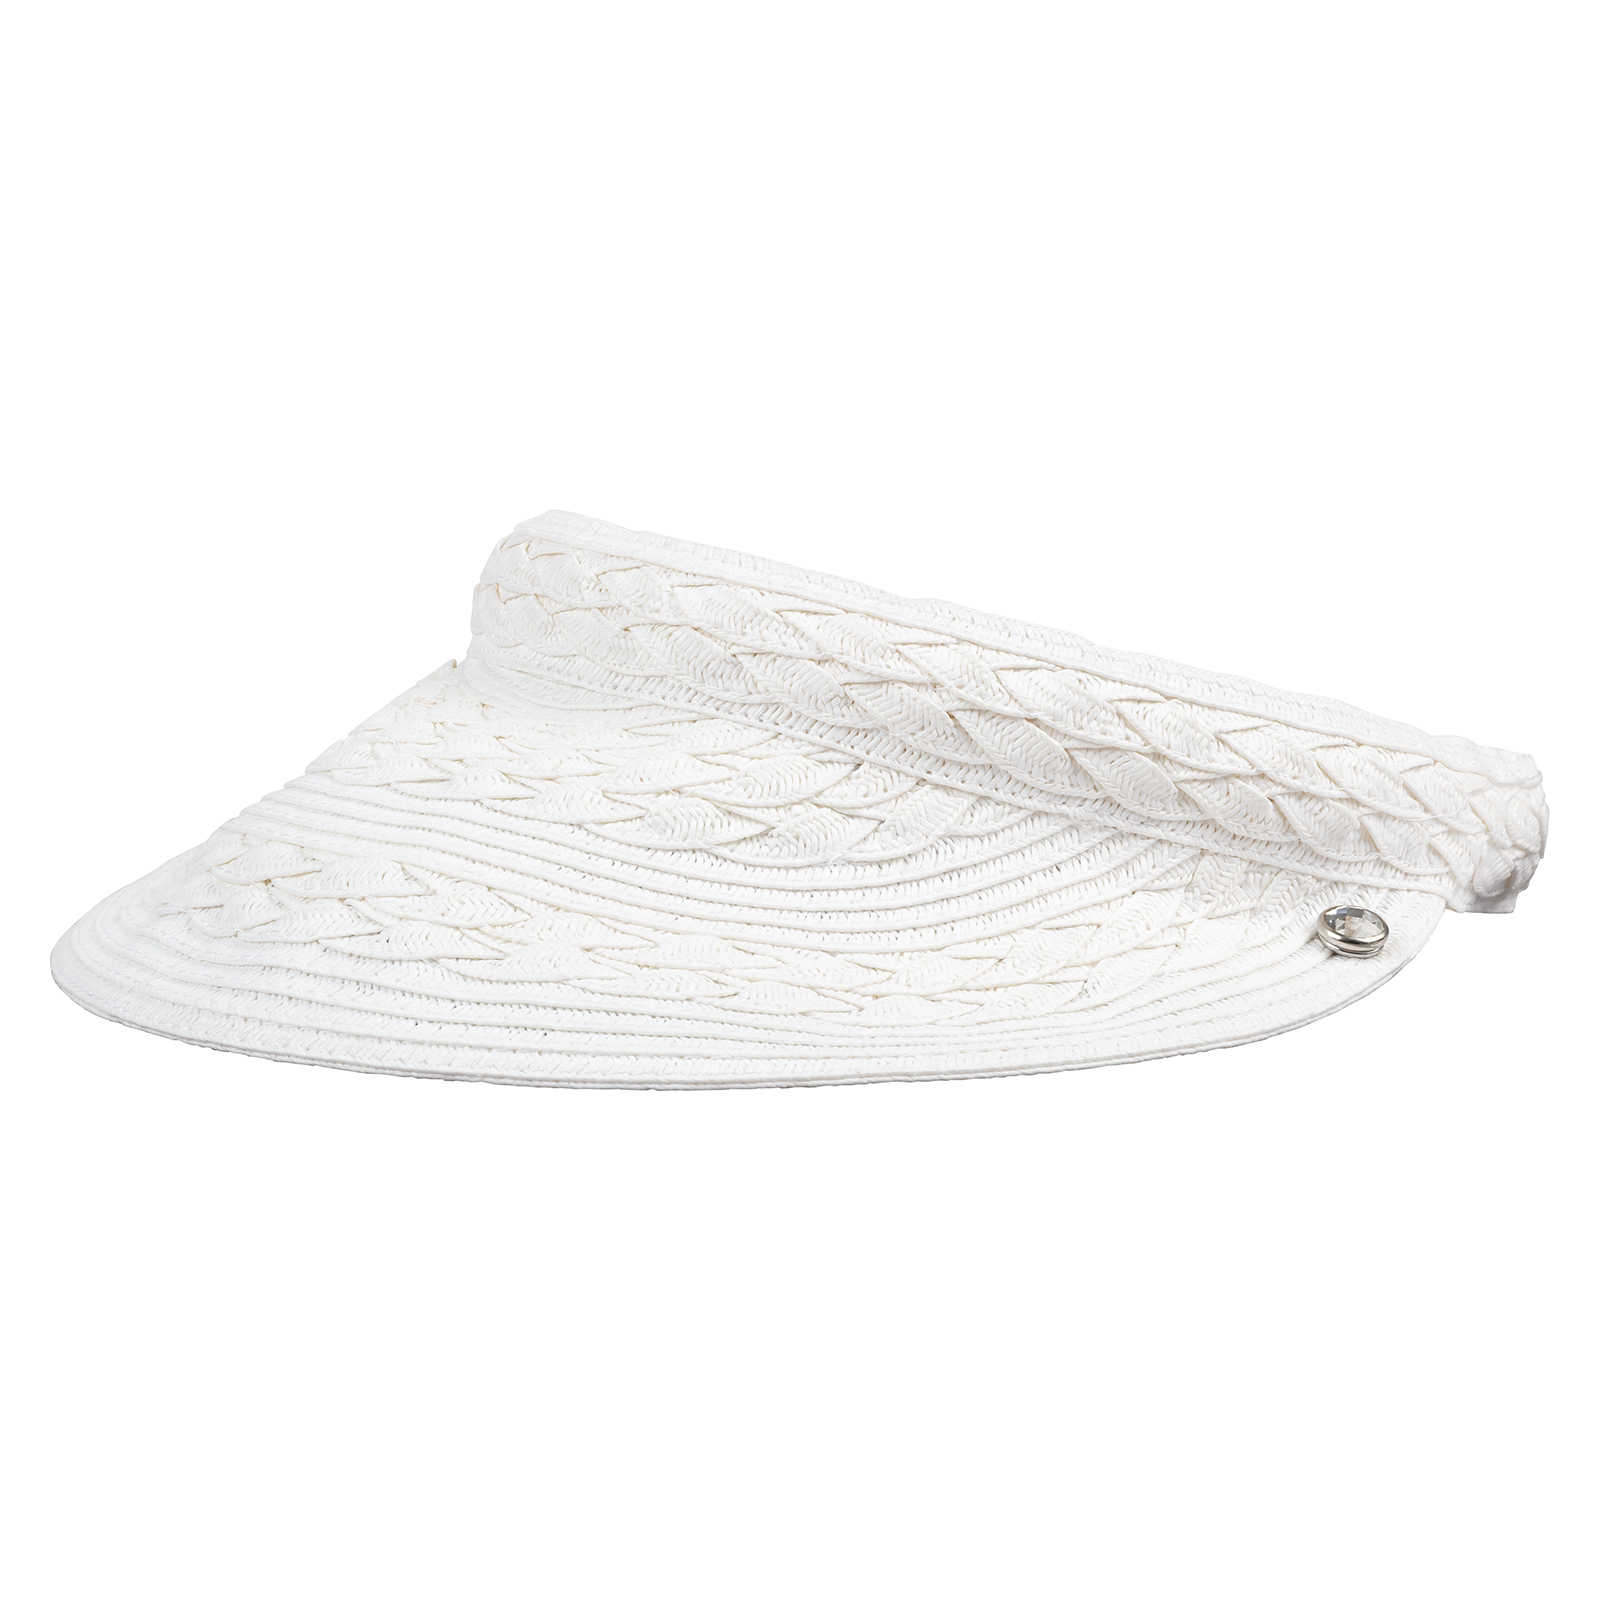 Ladies' golf visor made from fine Toyo paper straw 